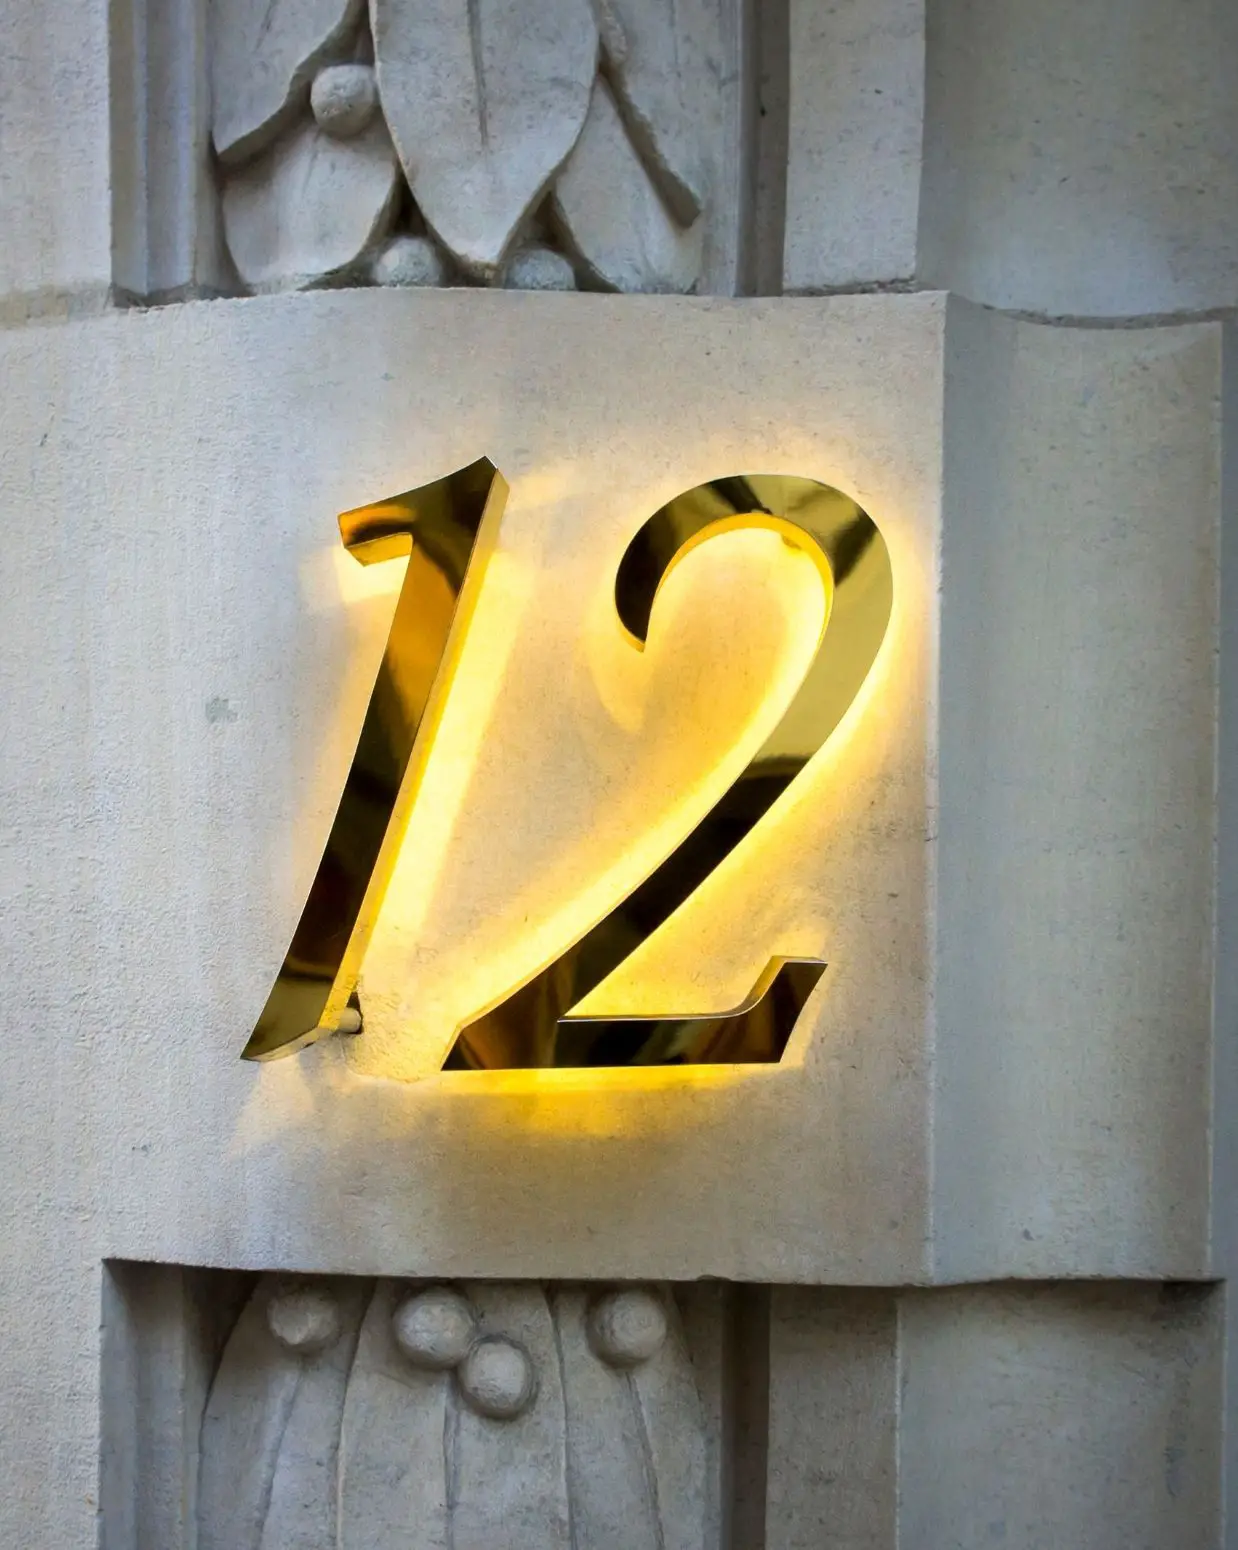 Spiritual Meaning Of The Number 12